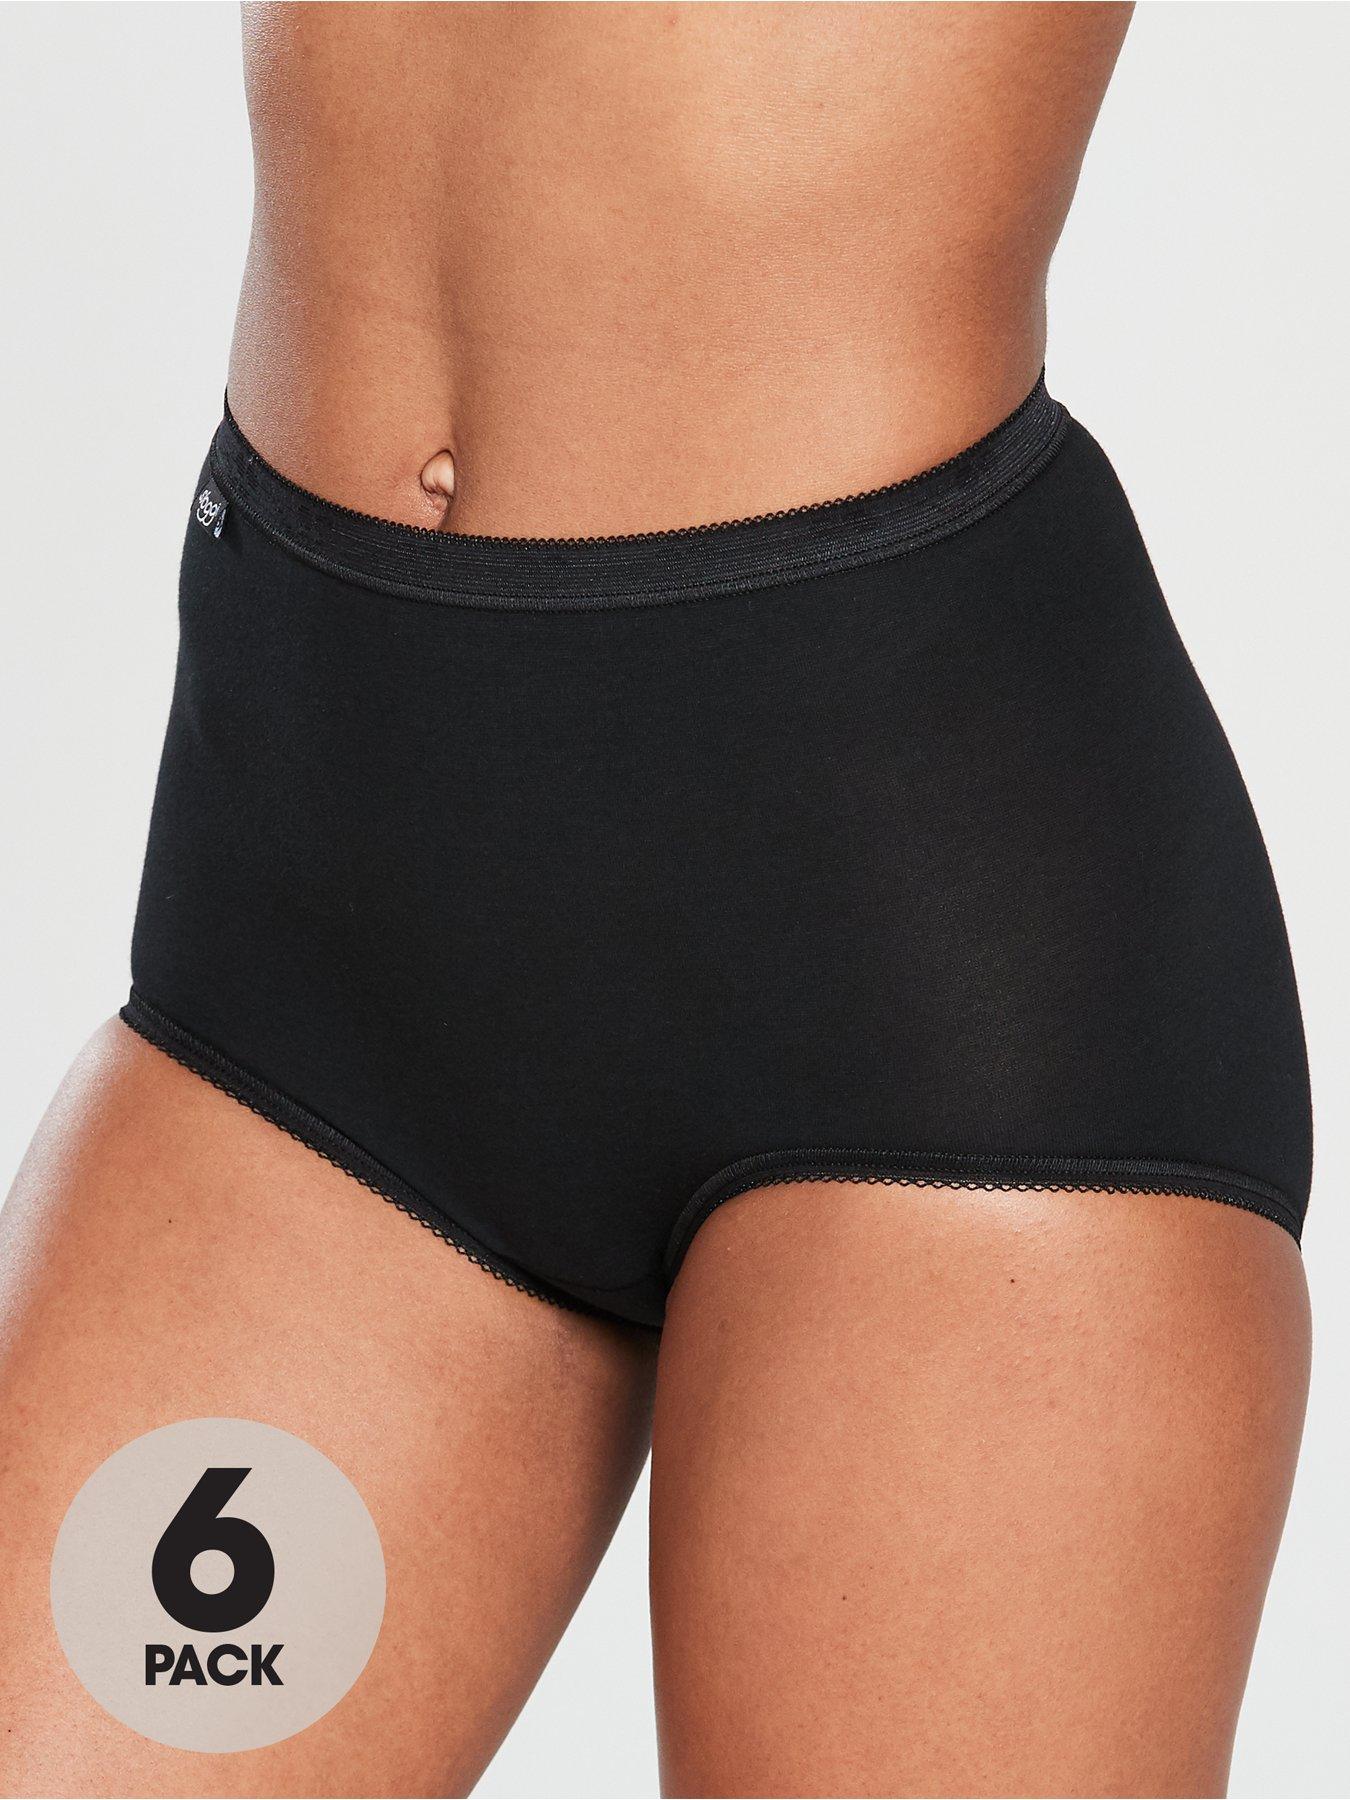 Best shapewear: These Sloggi slimming knickers are  bestsellers